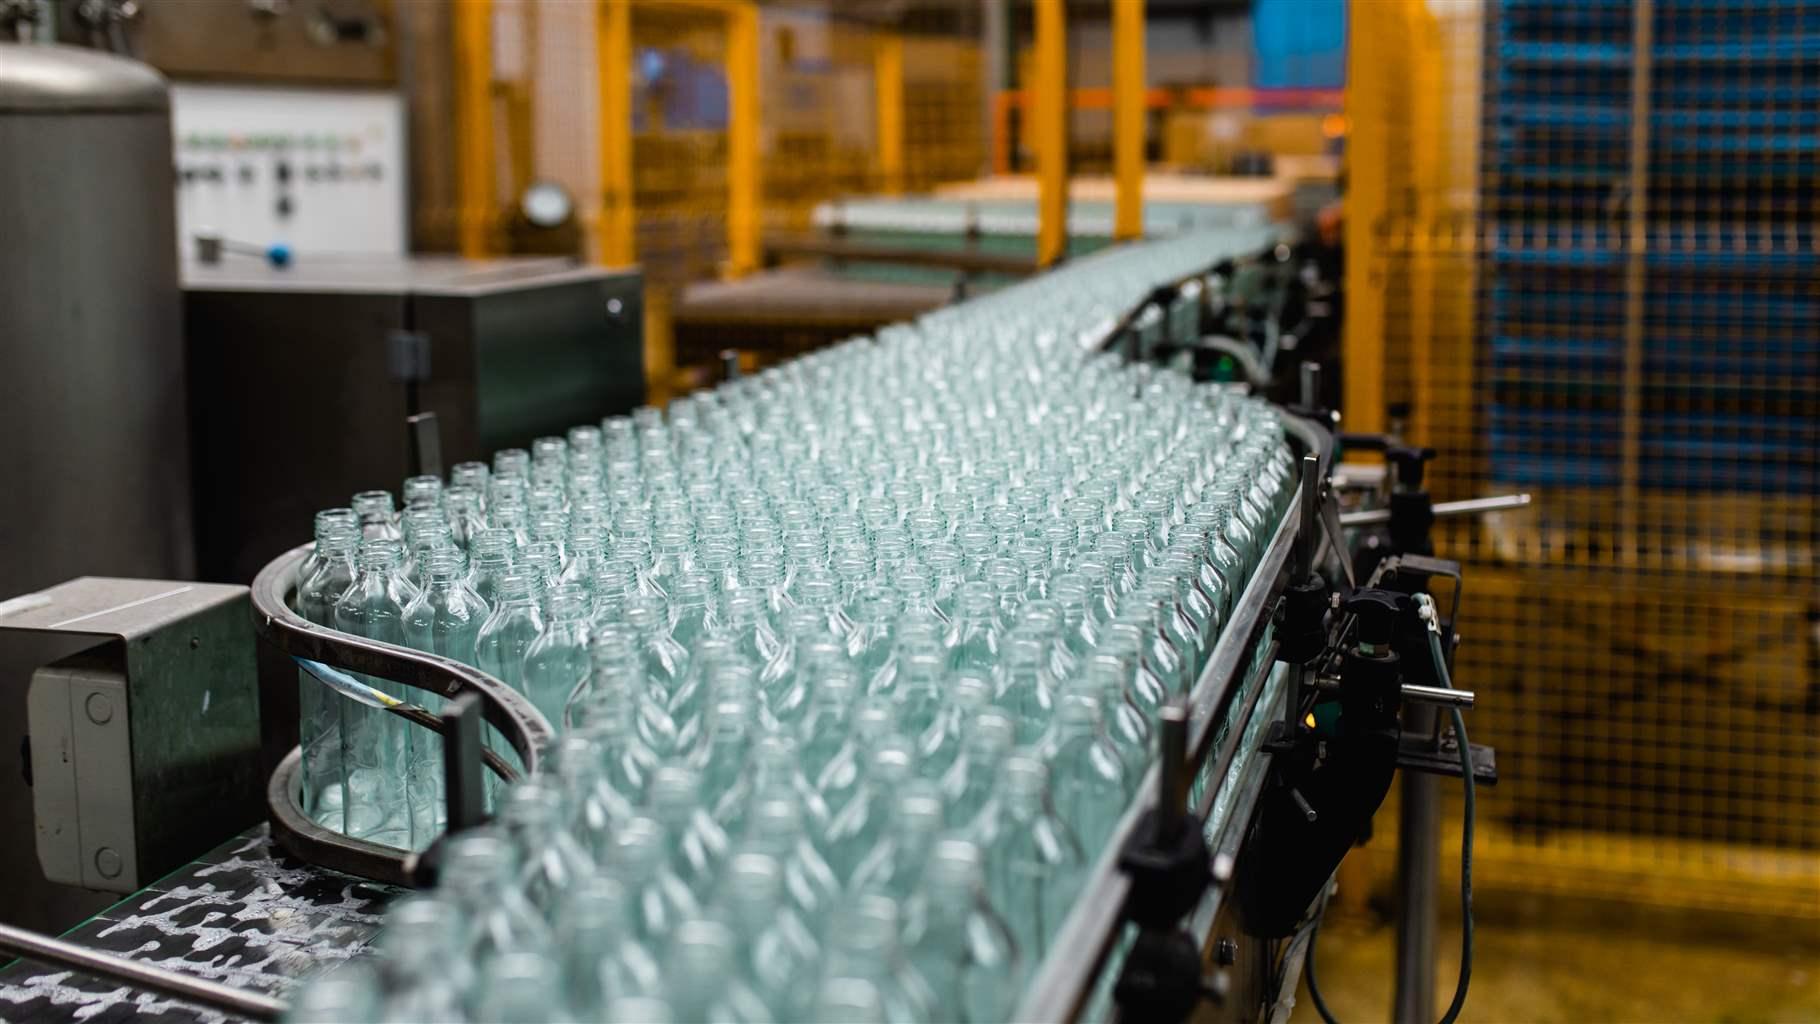  Hundreds of clear bottles, held in place by black rails, are crammed onto a conveyor belt moving through a factory.  